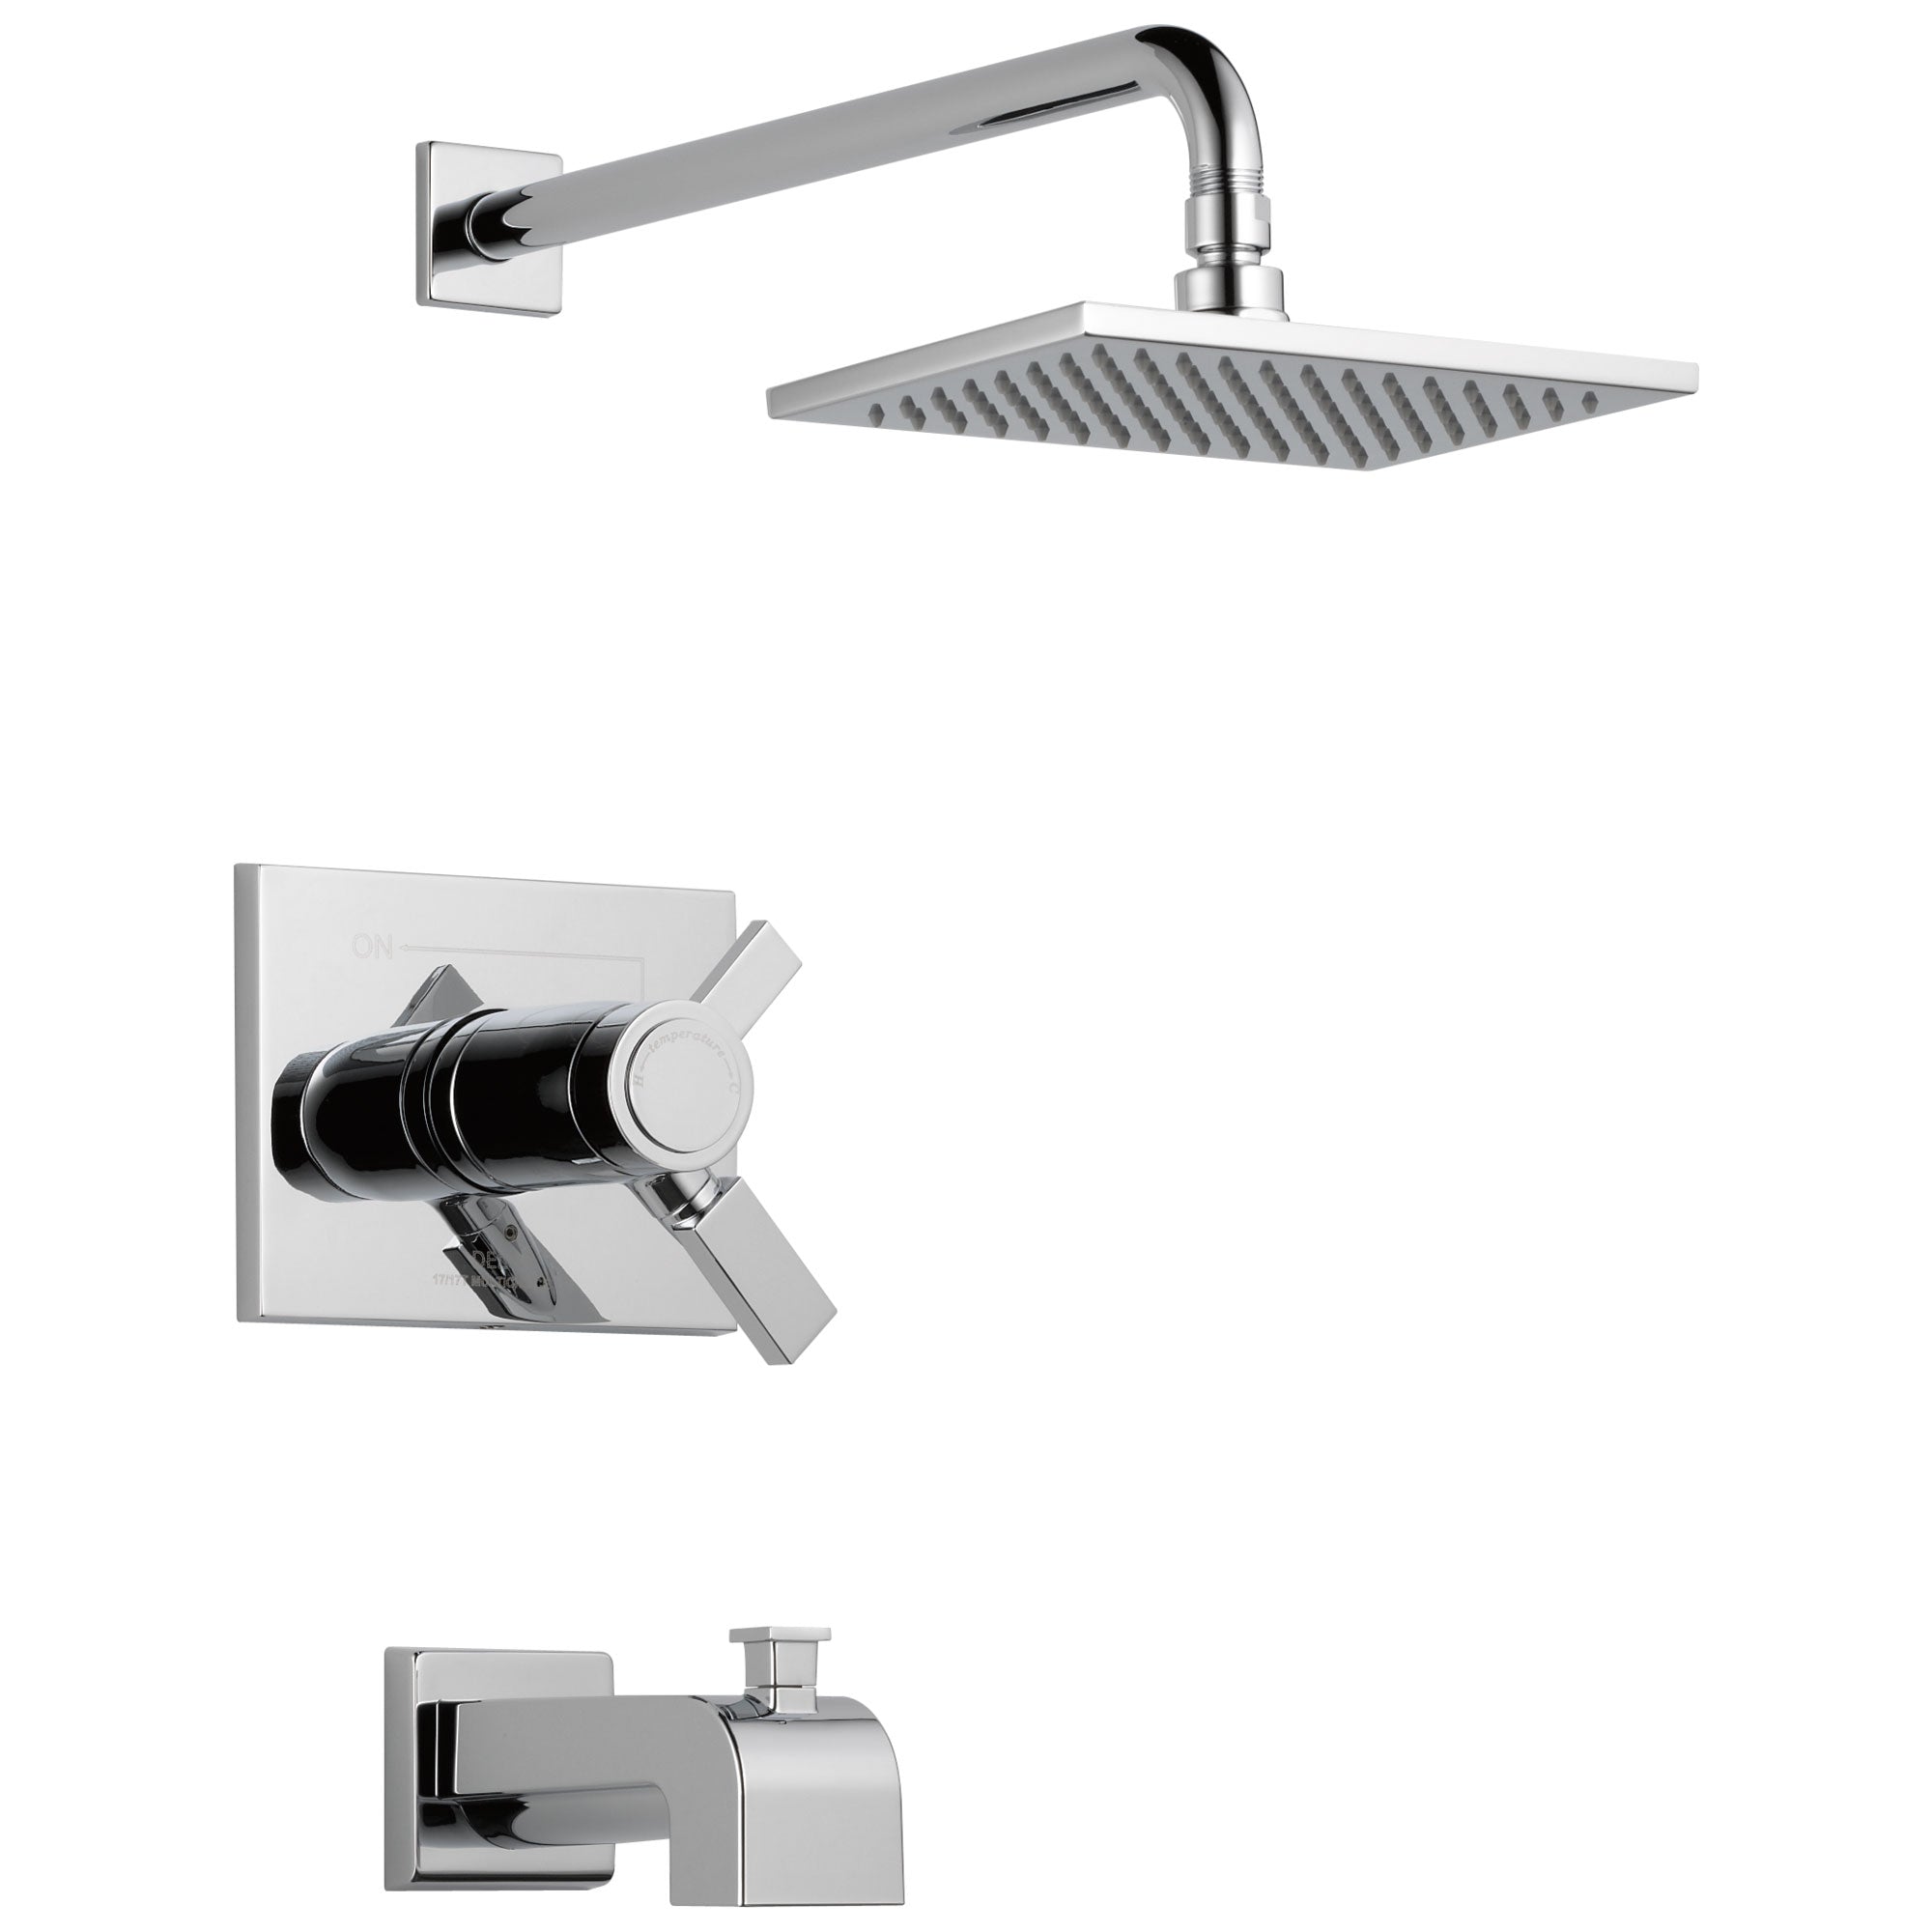 Delta Vero Chrome Finish Water Efficient Thermostatic Tub & Shower Faucet Combination Includes 17T Cartridge, Handles, and Valve with Stops D3236V